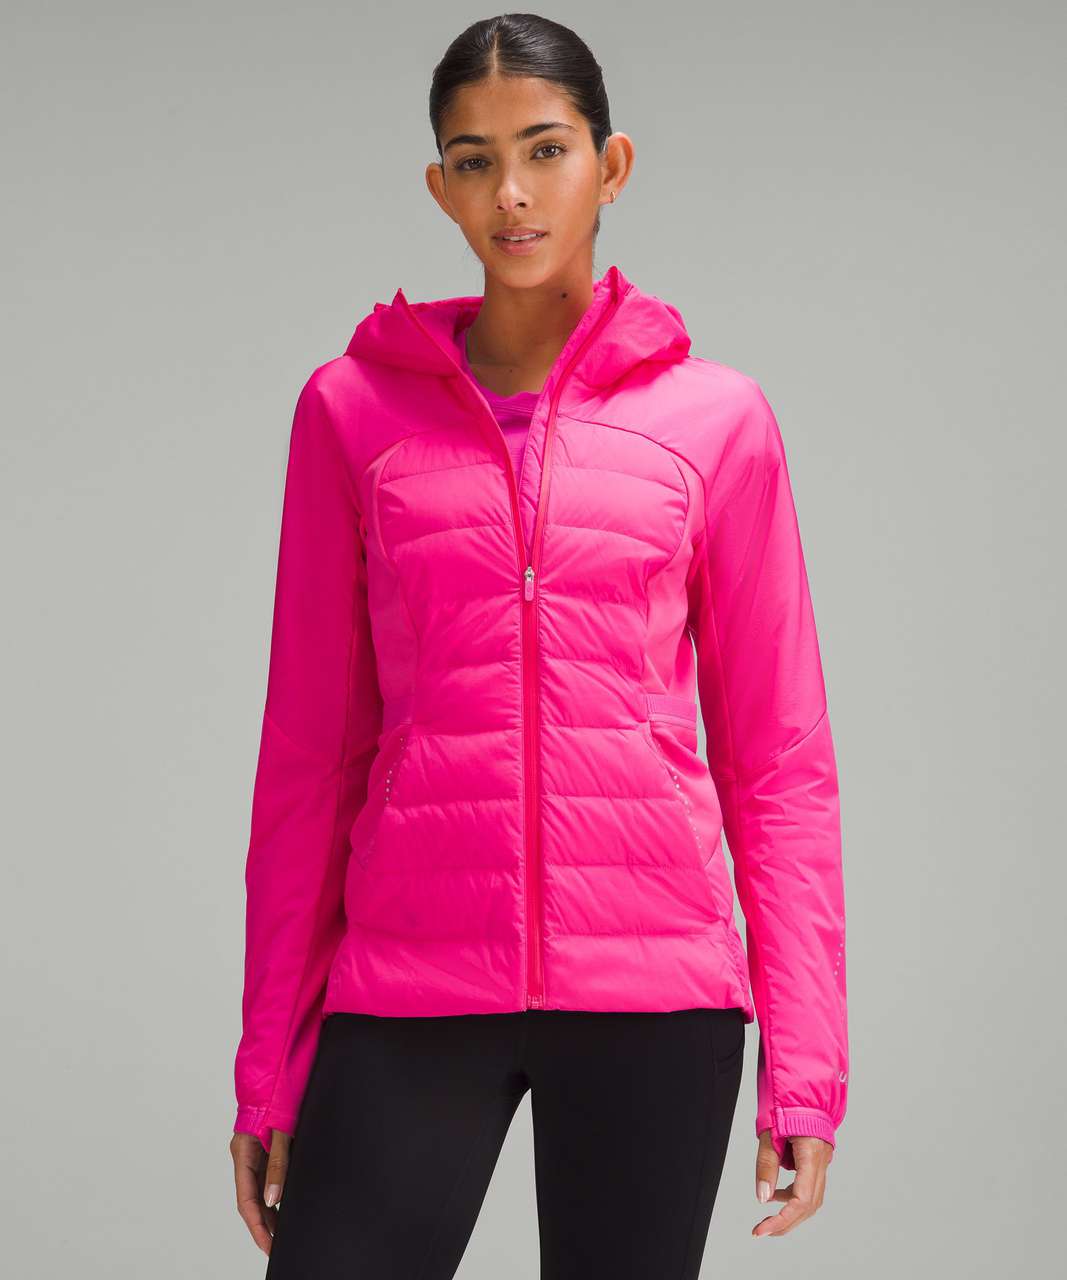 Lululemon Down for It All Jacket - Sonic Pink